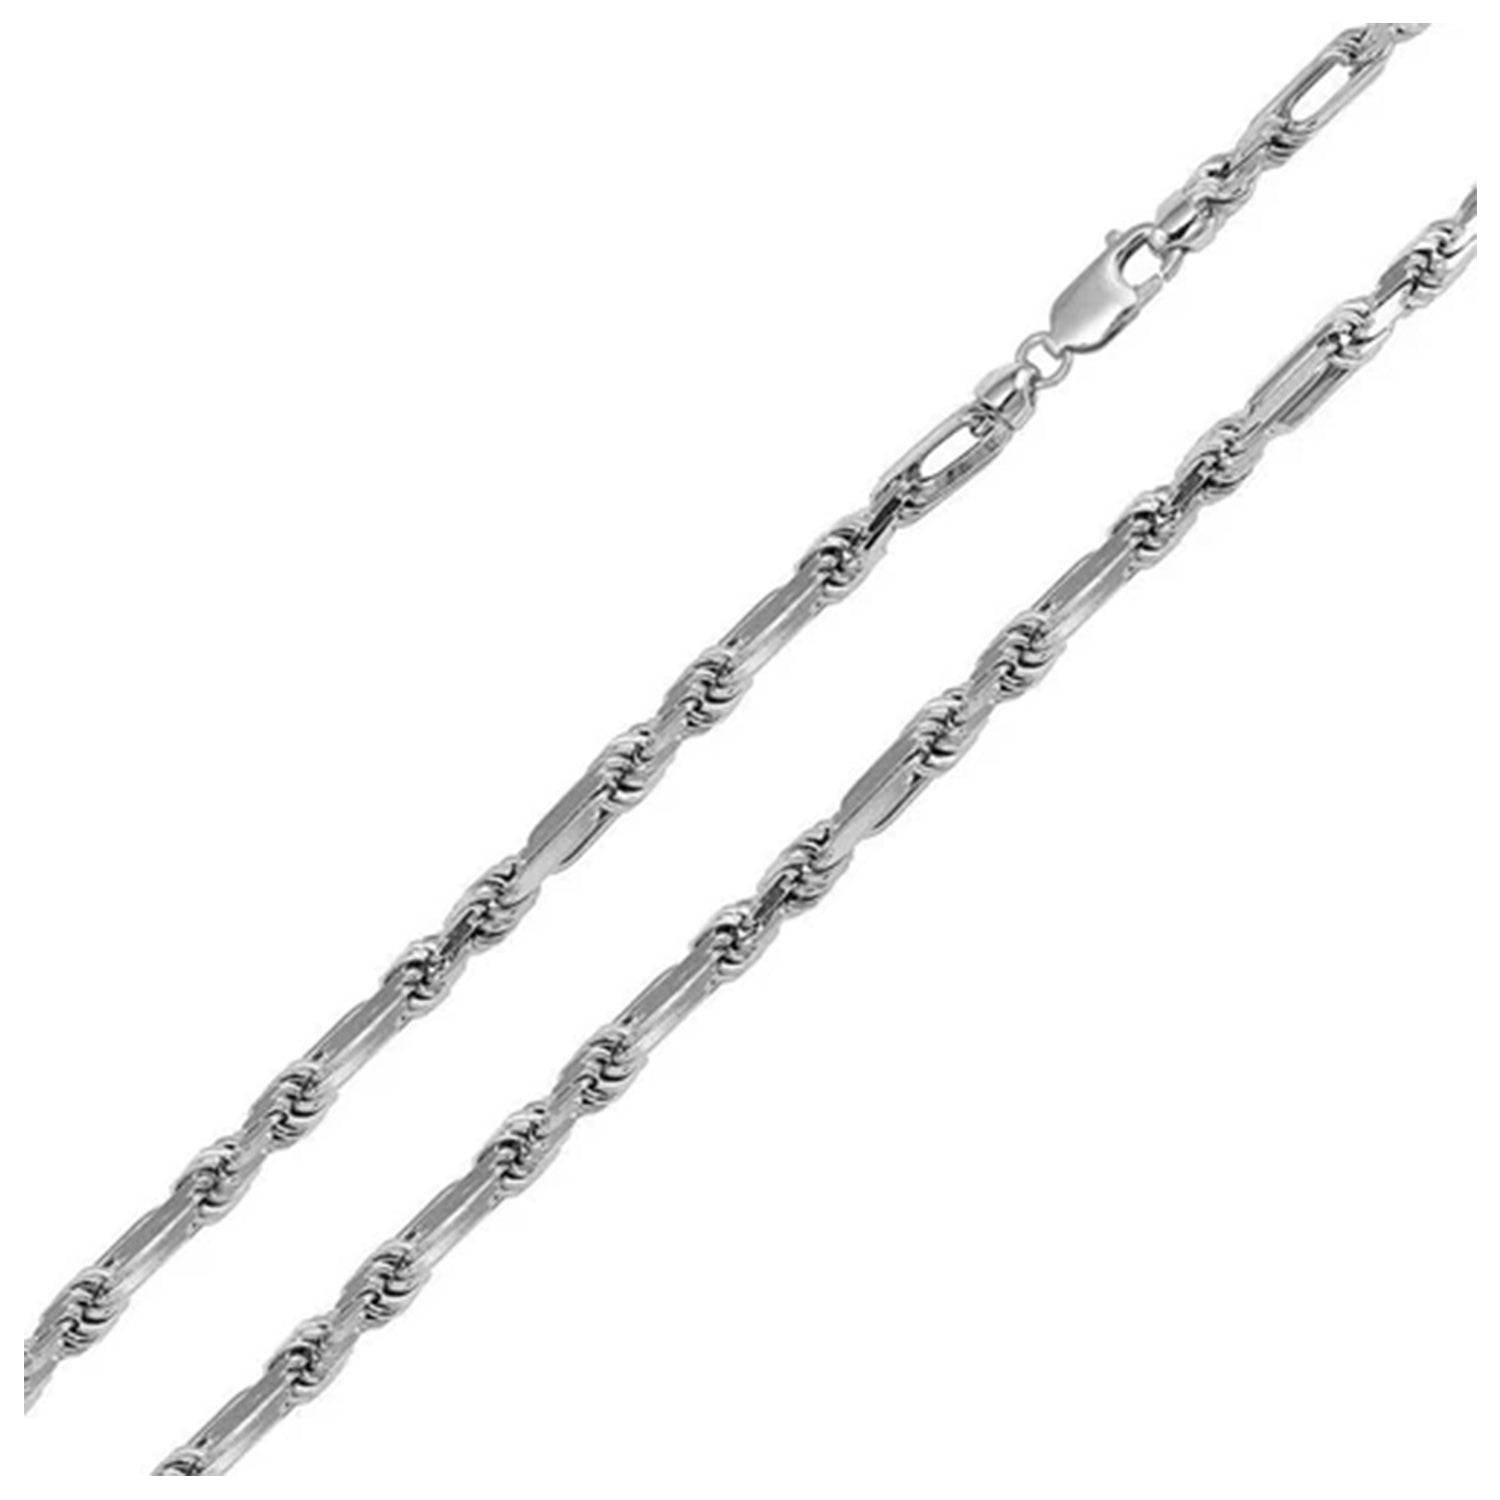 Sterling Silver 4 mm FigaRope Chain